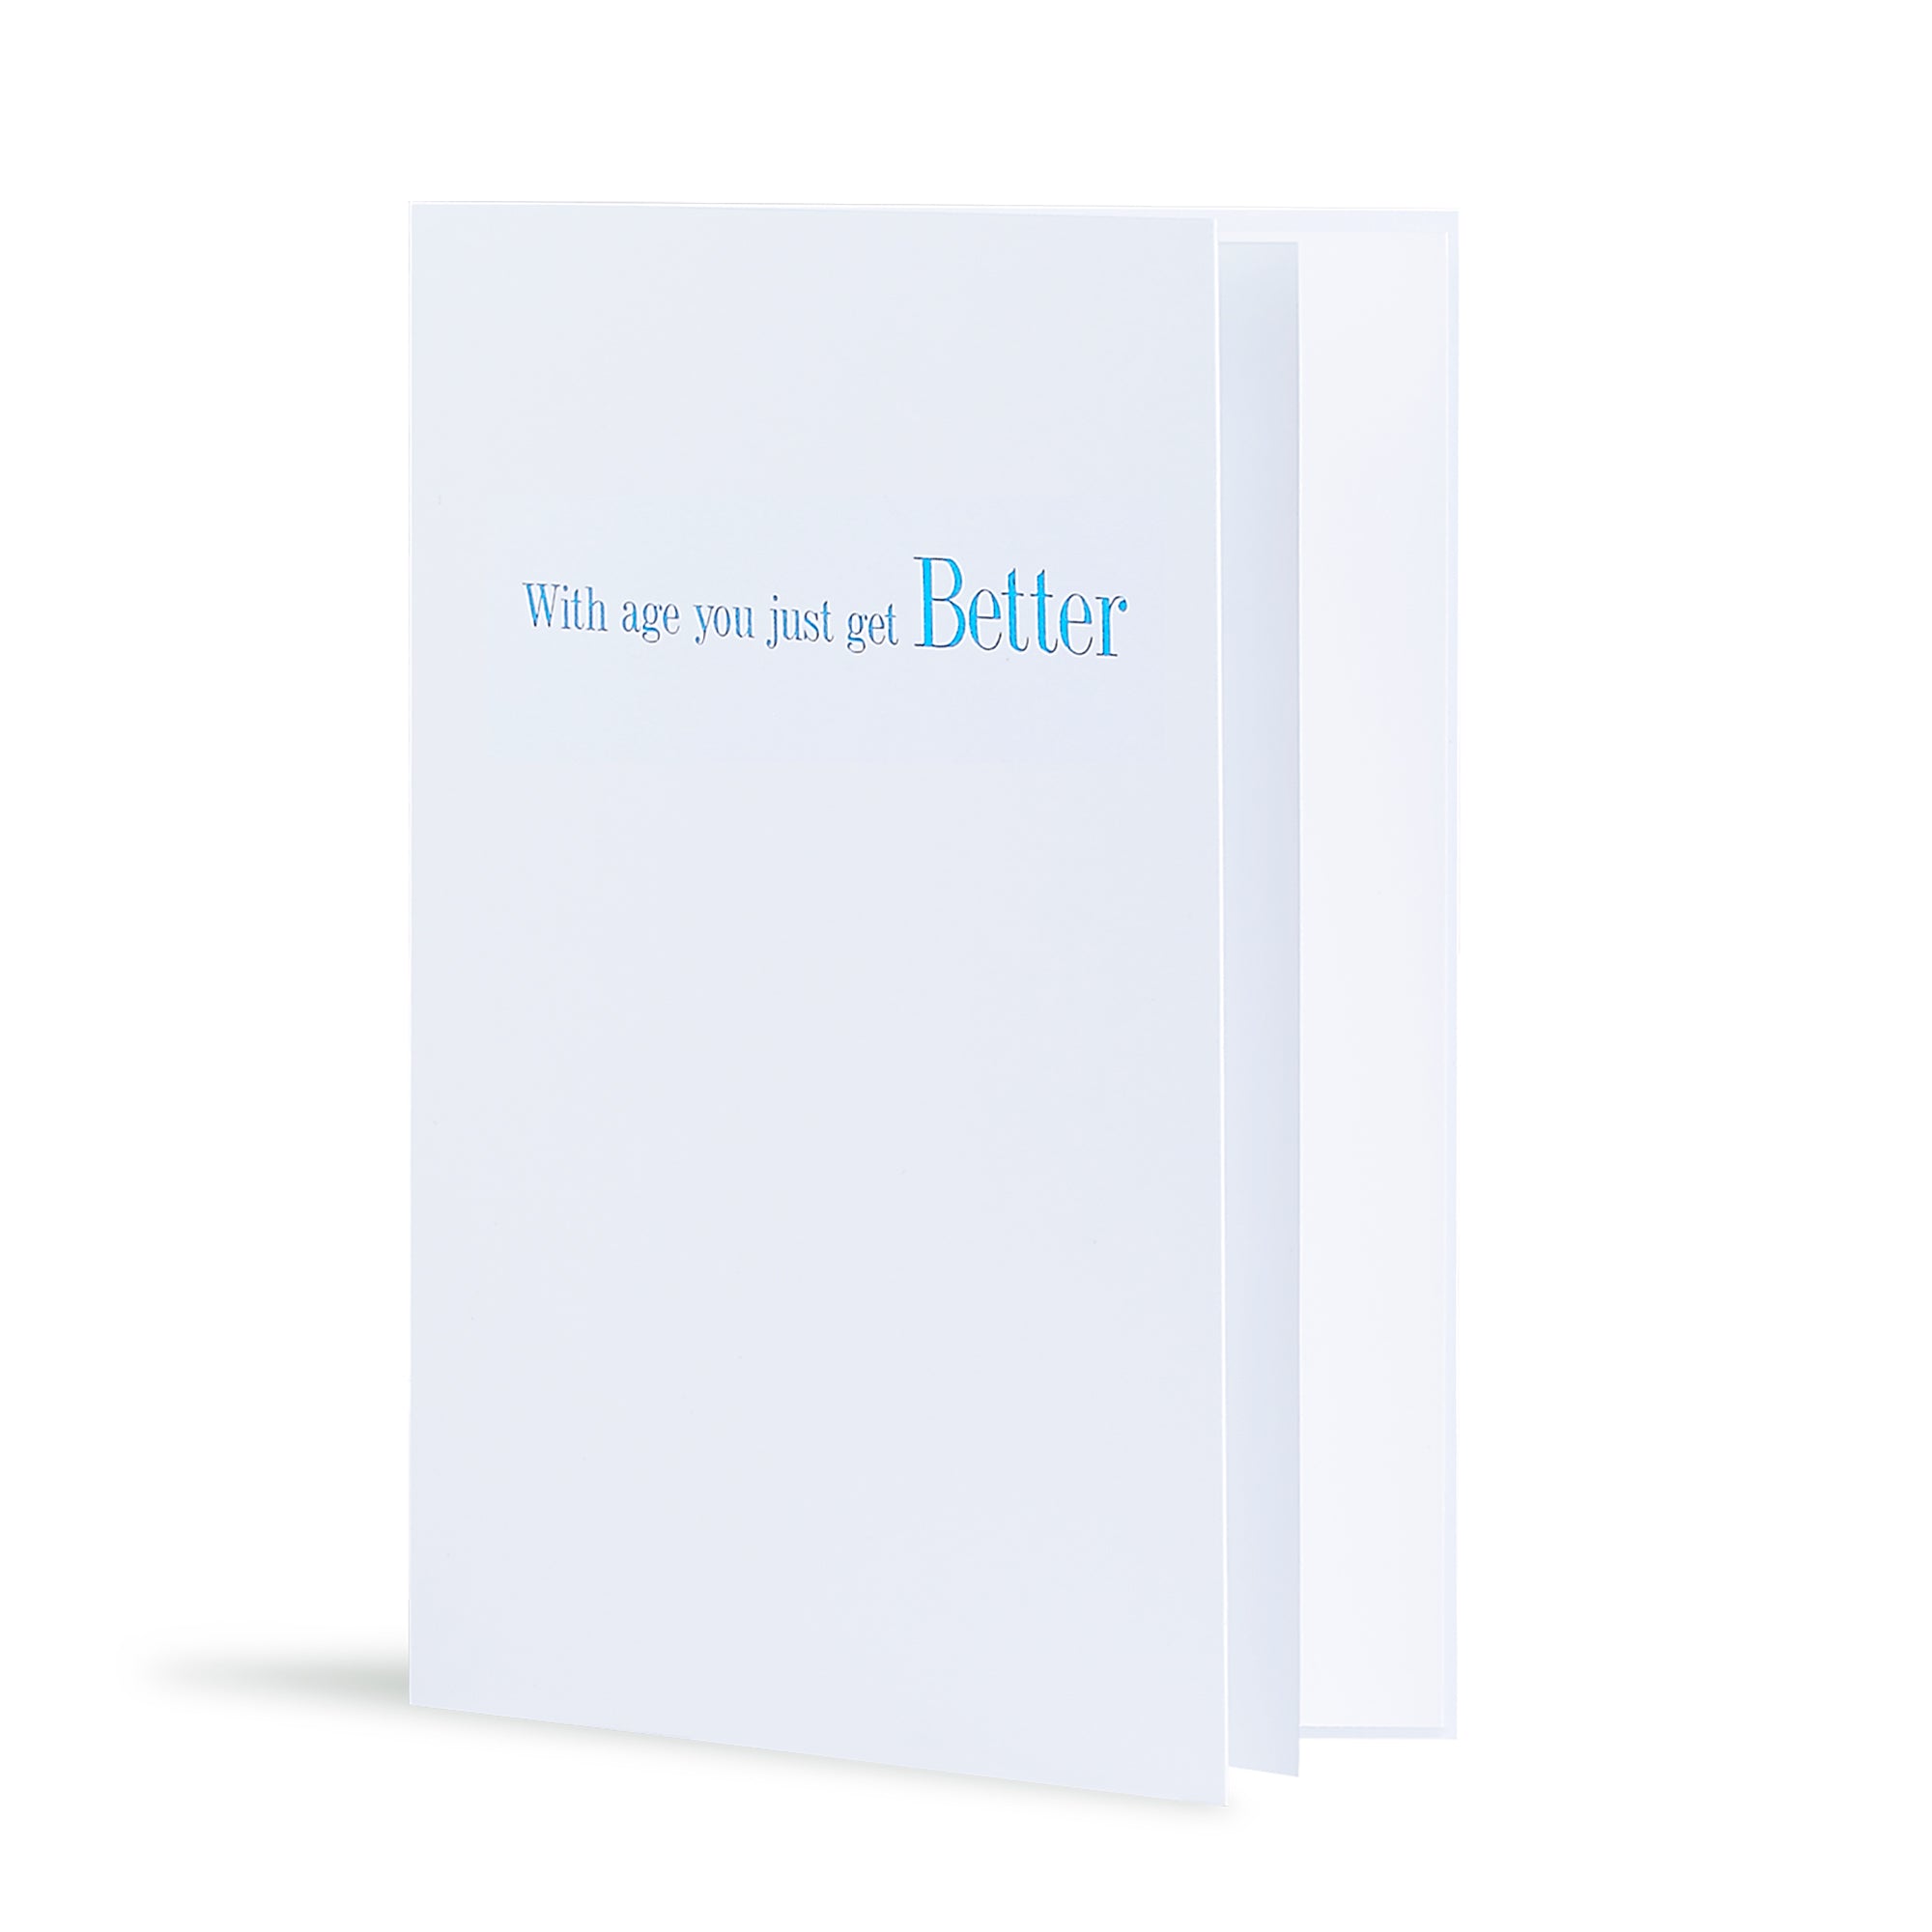 With Age You Just Get Better Greeting Card in White, Side